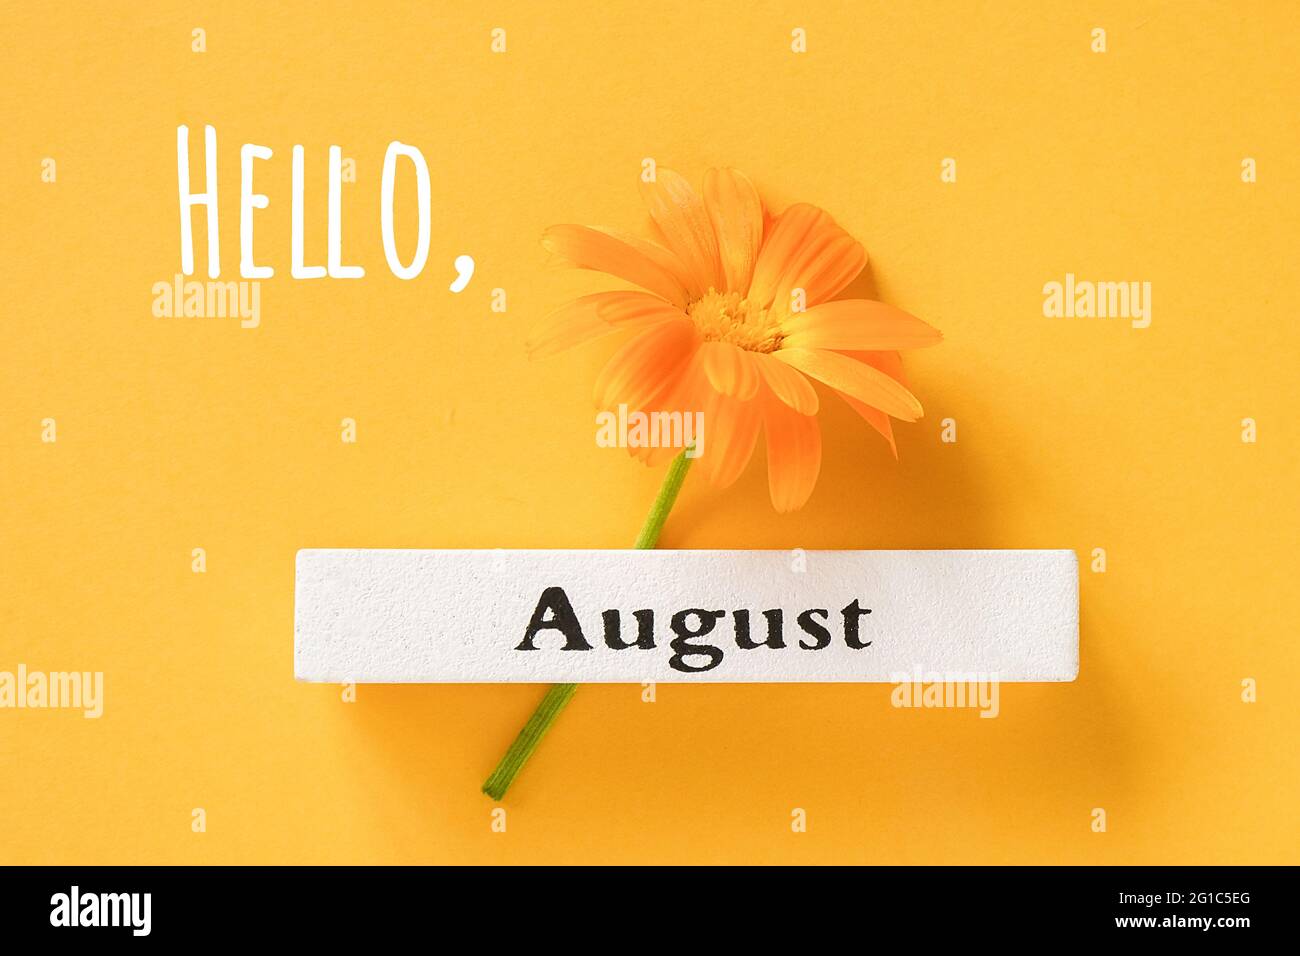 Hello August text, greeting card. One orange calendula flower and calendar summer month August on yellow background. Top view Flat lay. Stock Photo